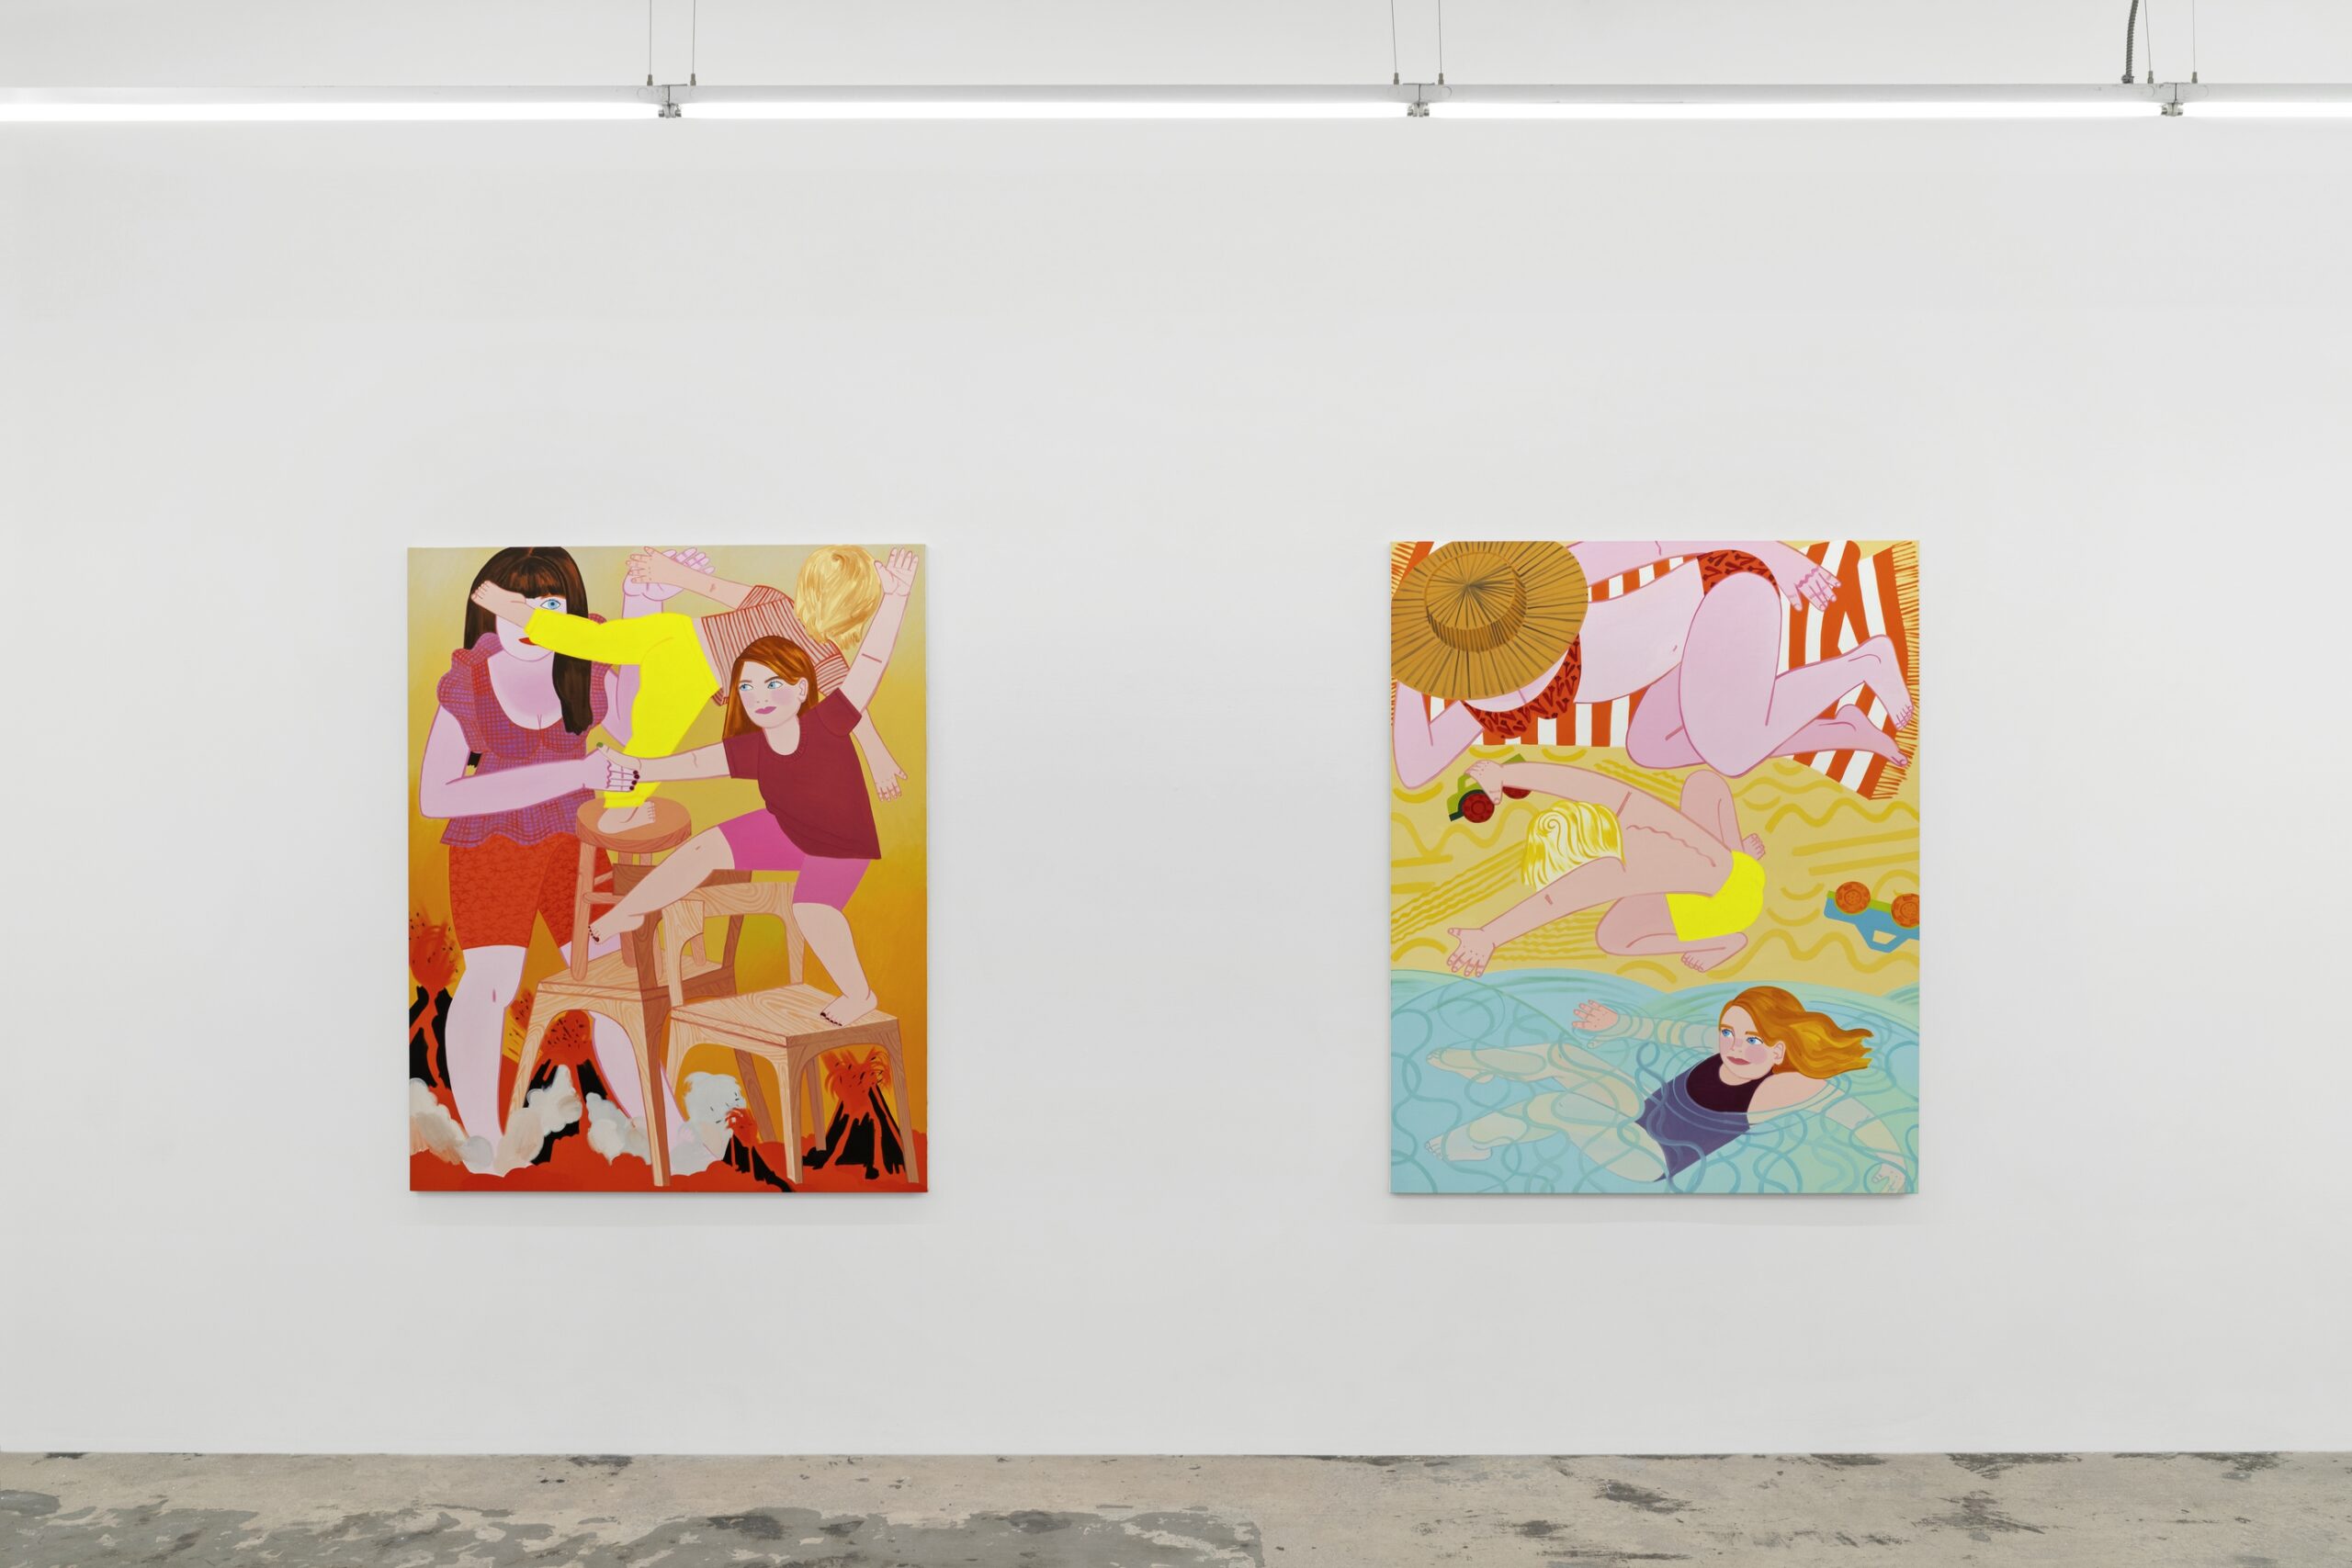 Installation view of Madeline Donahue: Present Tense on view in the Front Gallery. Photographed are oil on canvas paintings titled "A Really Nice Place to Enjoy You" and "Floor is Lava."